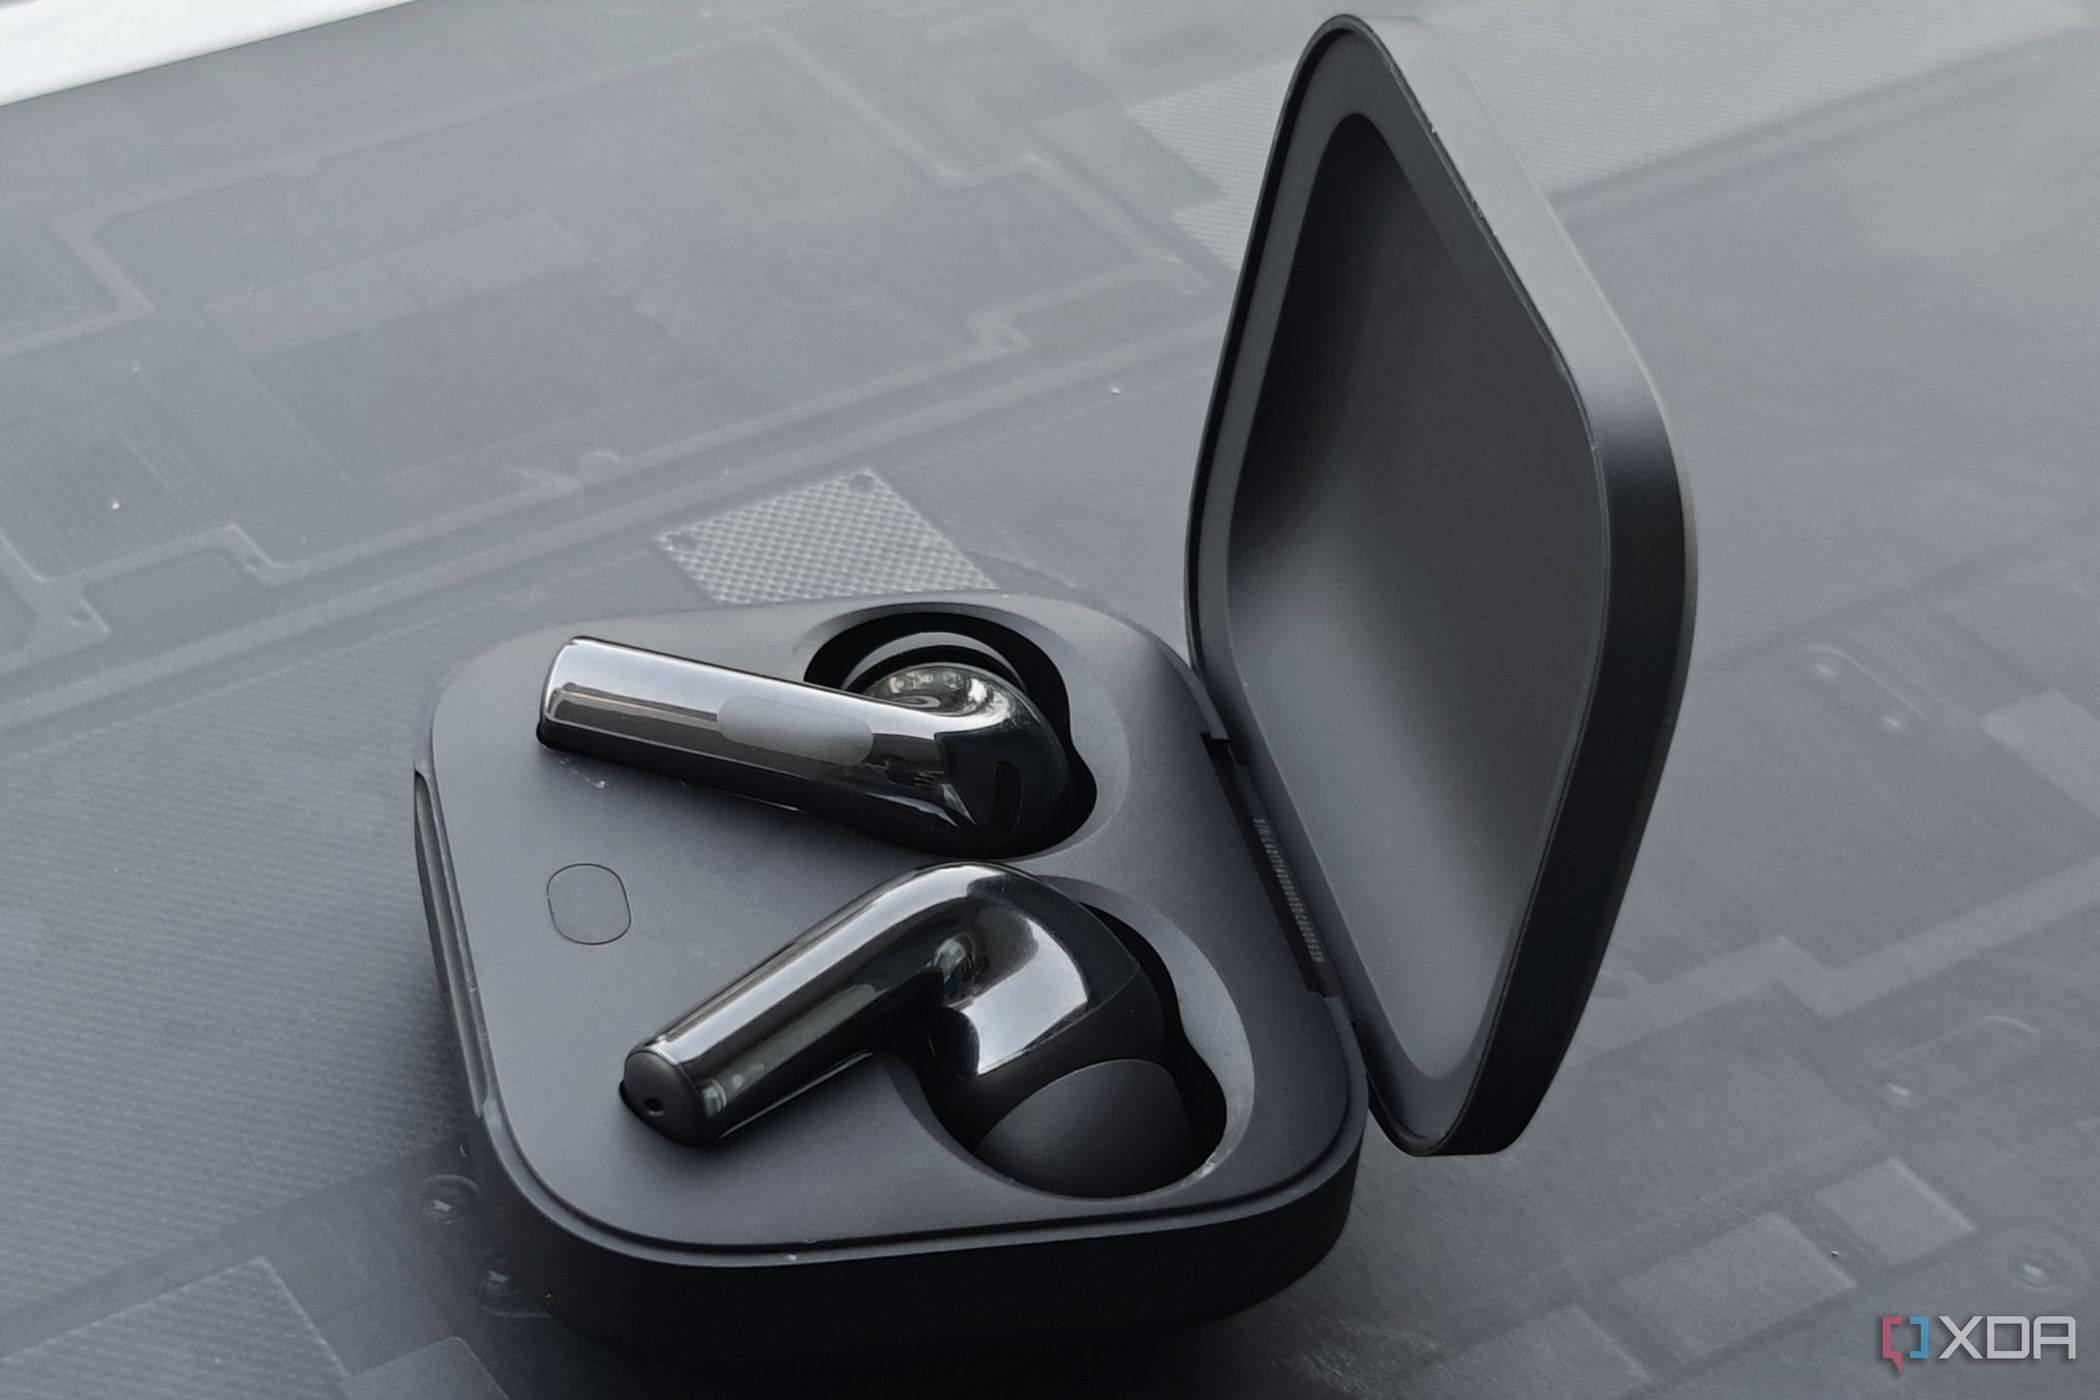 An image showing a pair of OnePlus Buds 3 earbuds sitting inside the case.